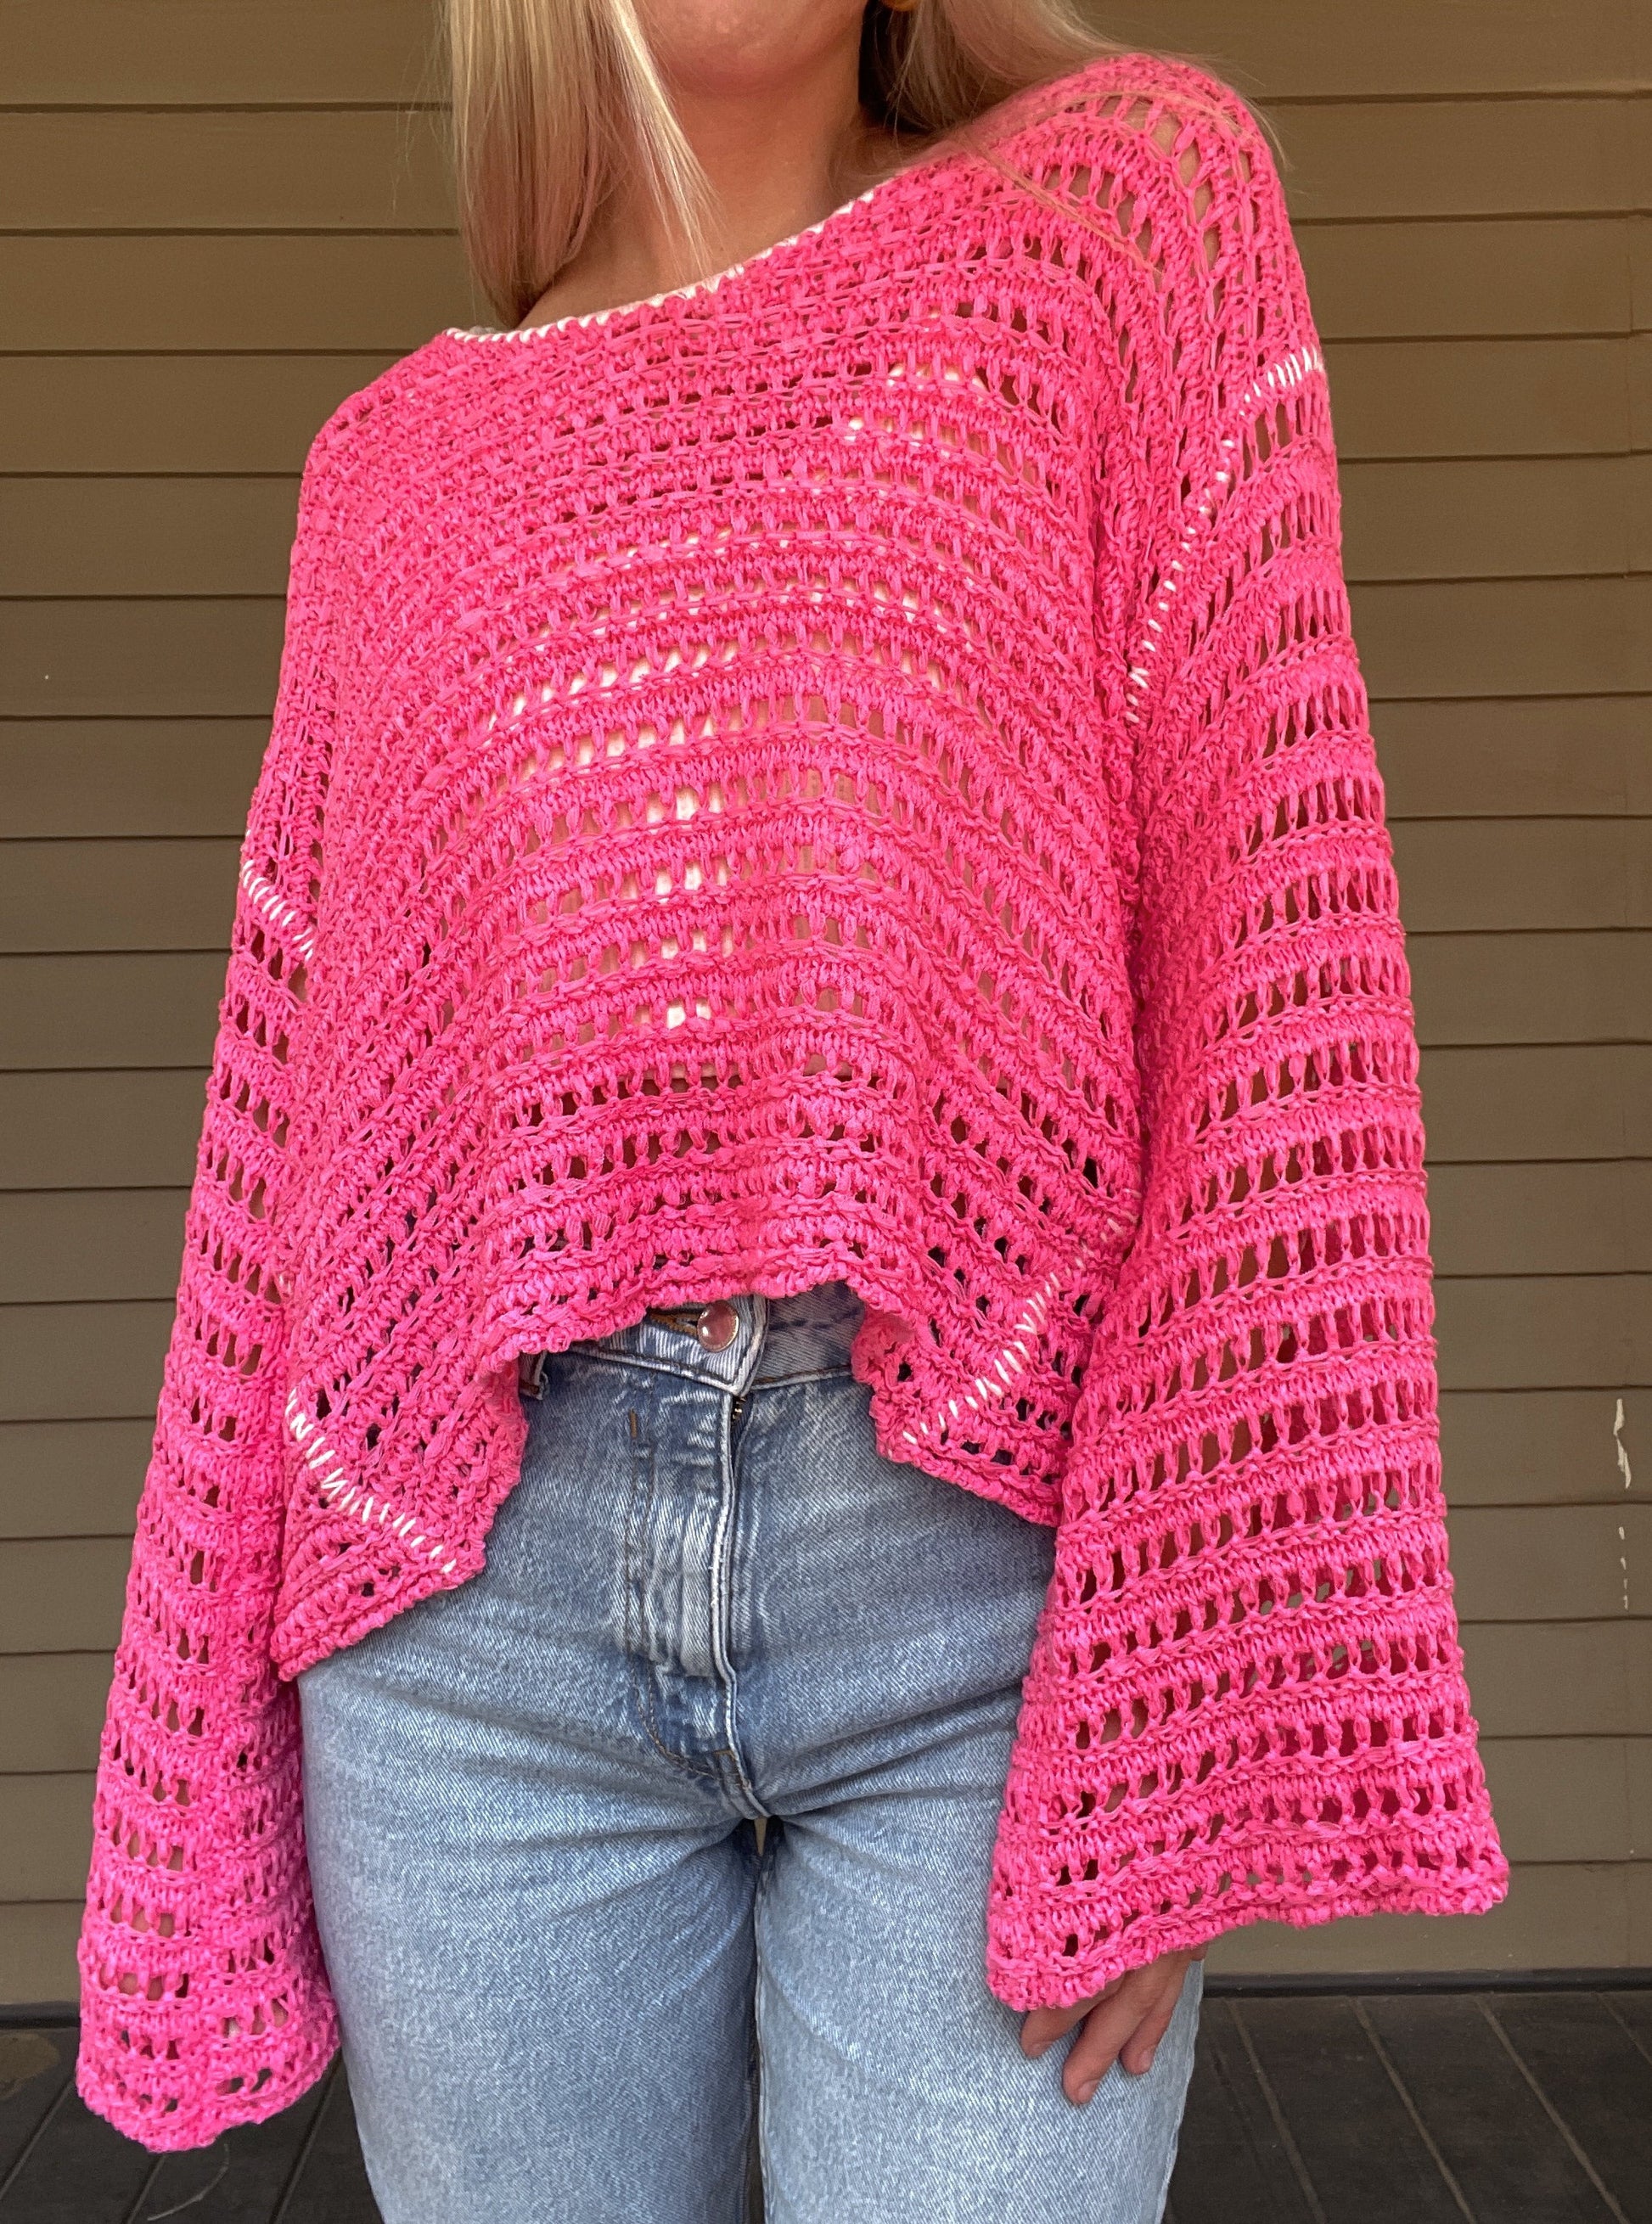 True Romance Open Knit Sweater - Pink  Open Knit Sweater Tie Back  Crochet Top 53% Acrylic, 47% Nylon Color: Pink Look stylish and feel relaxed with this pink True Romance Open Knit Sweater. Crafted with a delicate crochet top, this sweater is the perfect piece to keep you comfortable and fashionable. The classic design makes it easy to pair with any outfit for a stunning look.